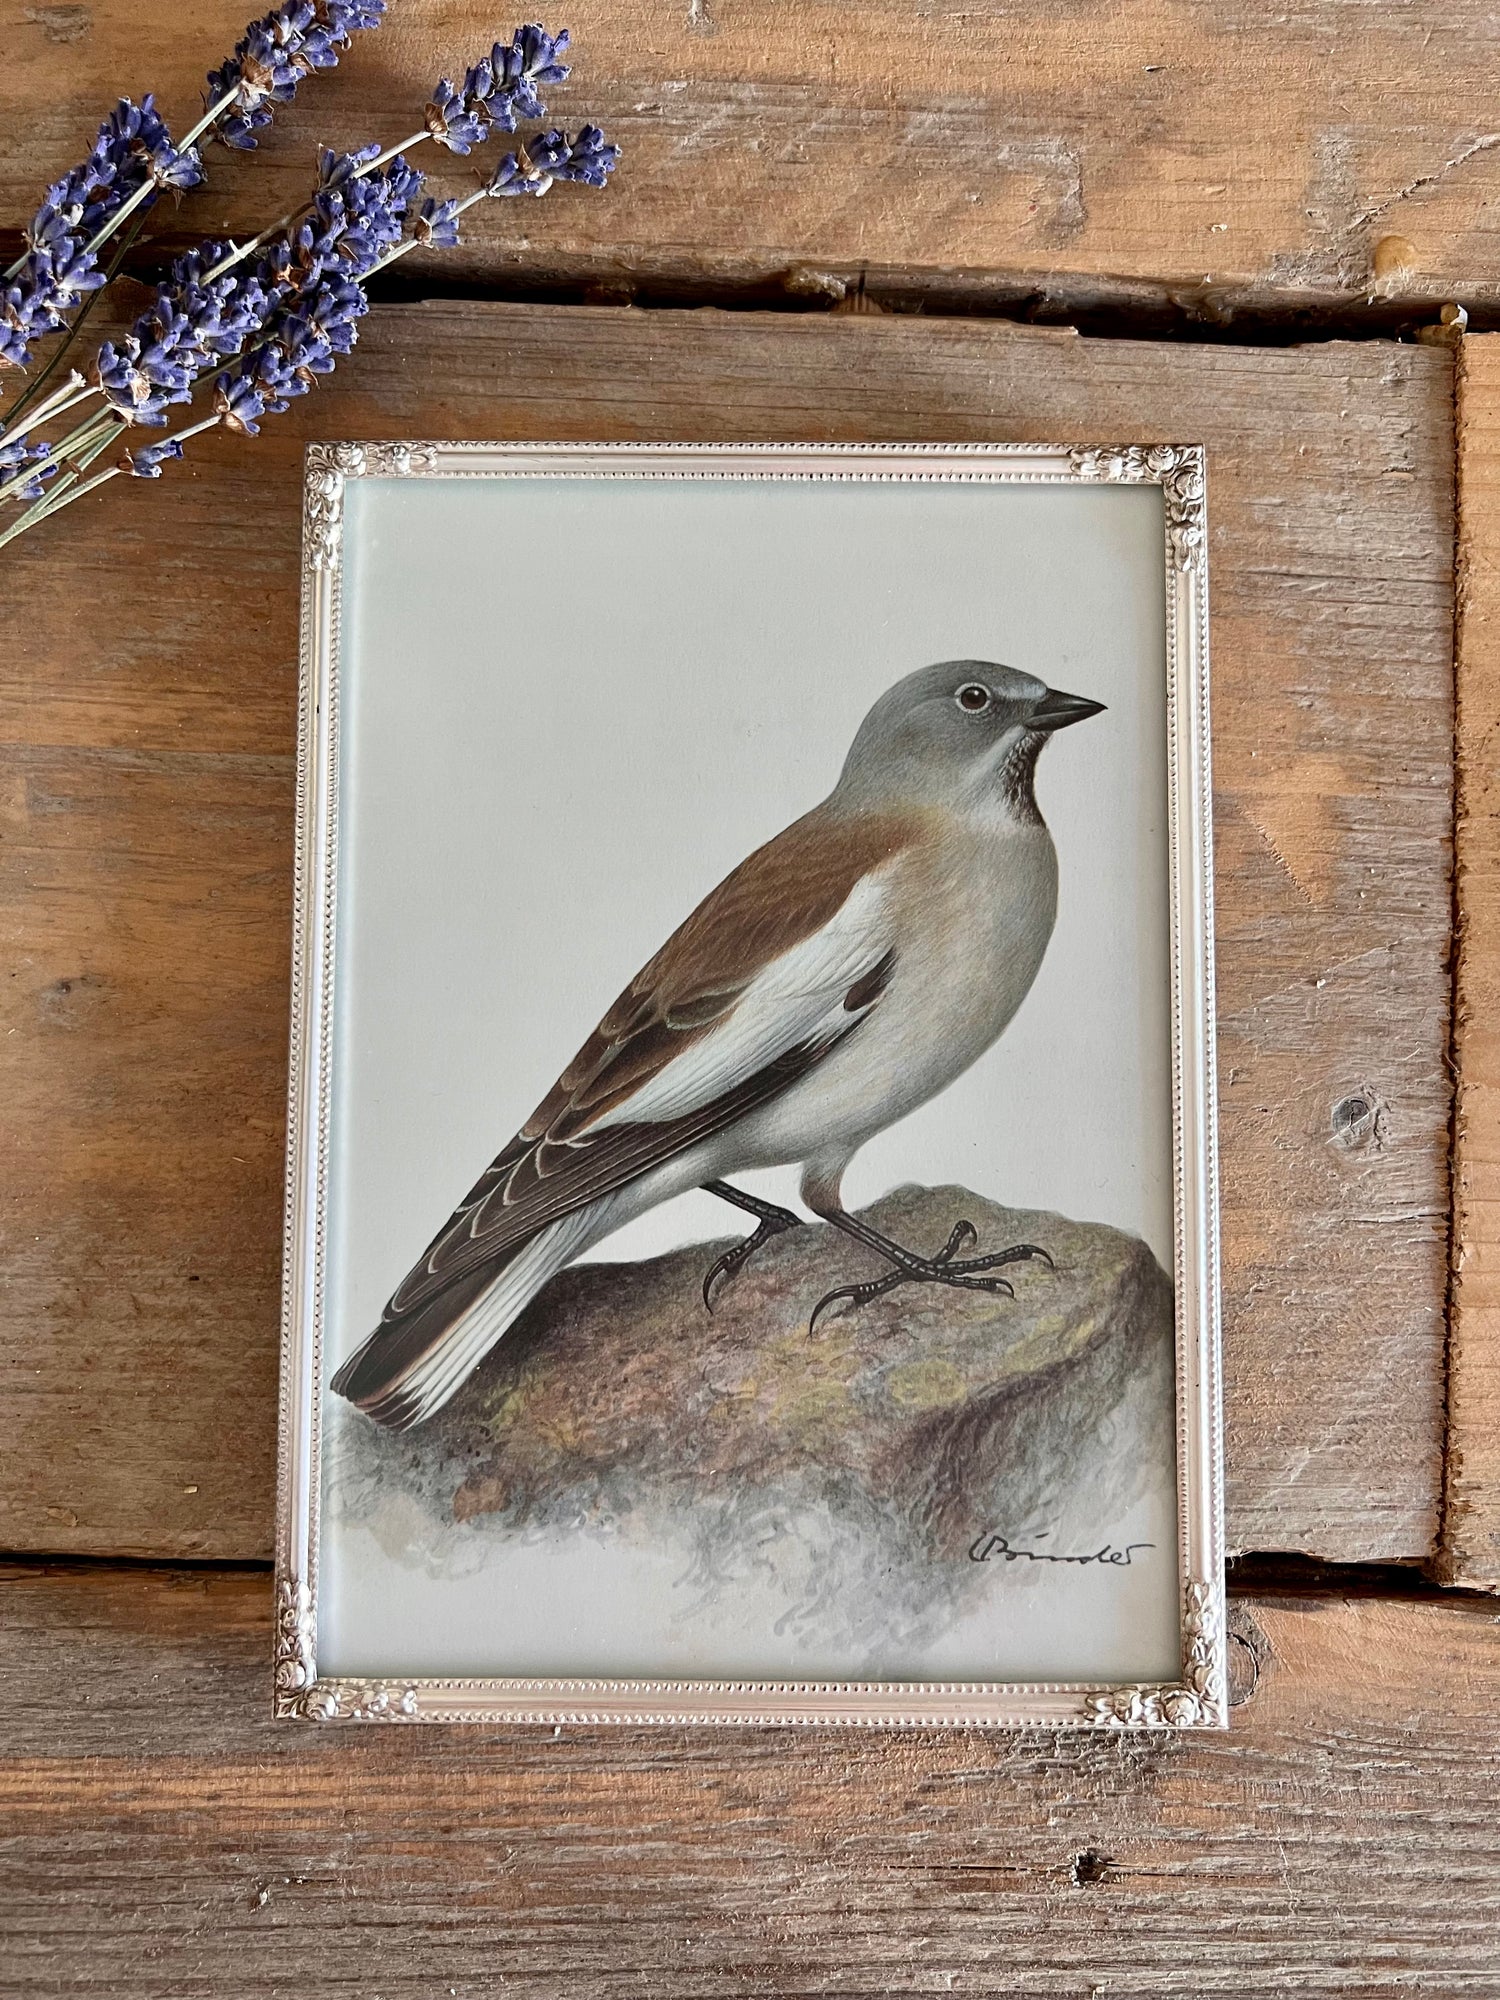 Vintage frame with snowfinch